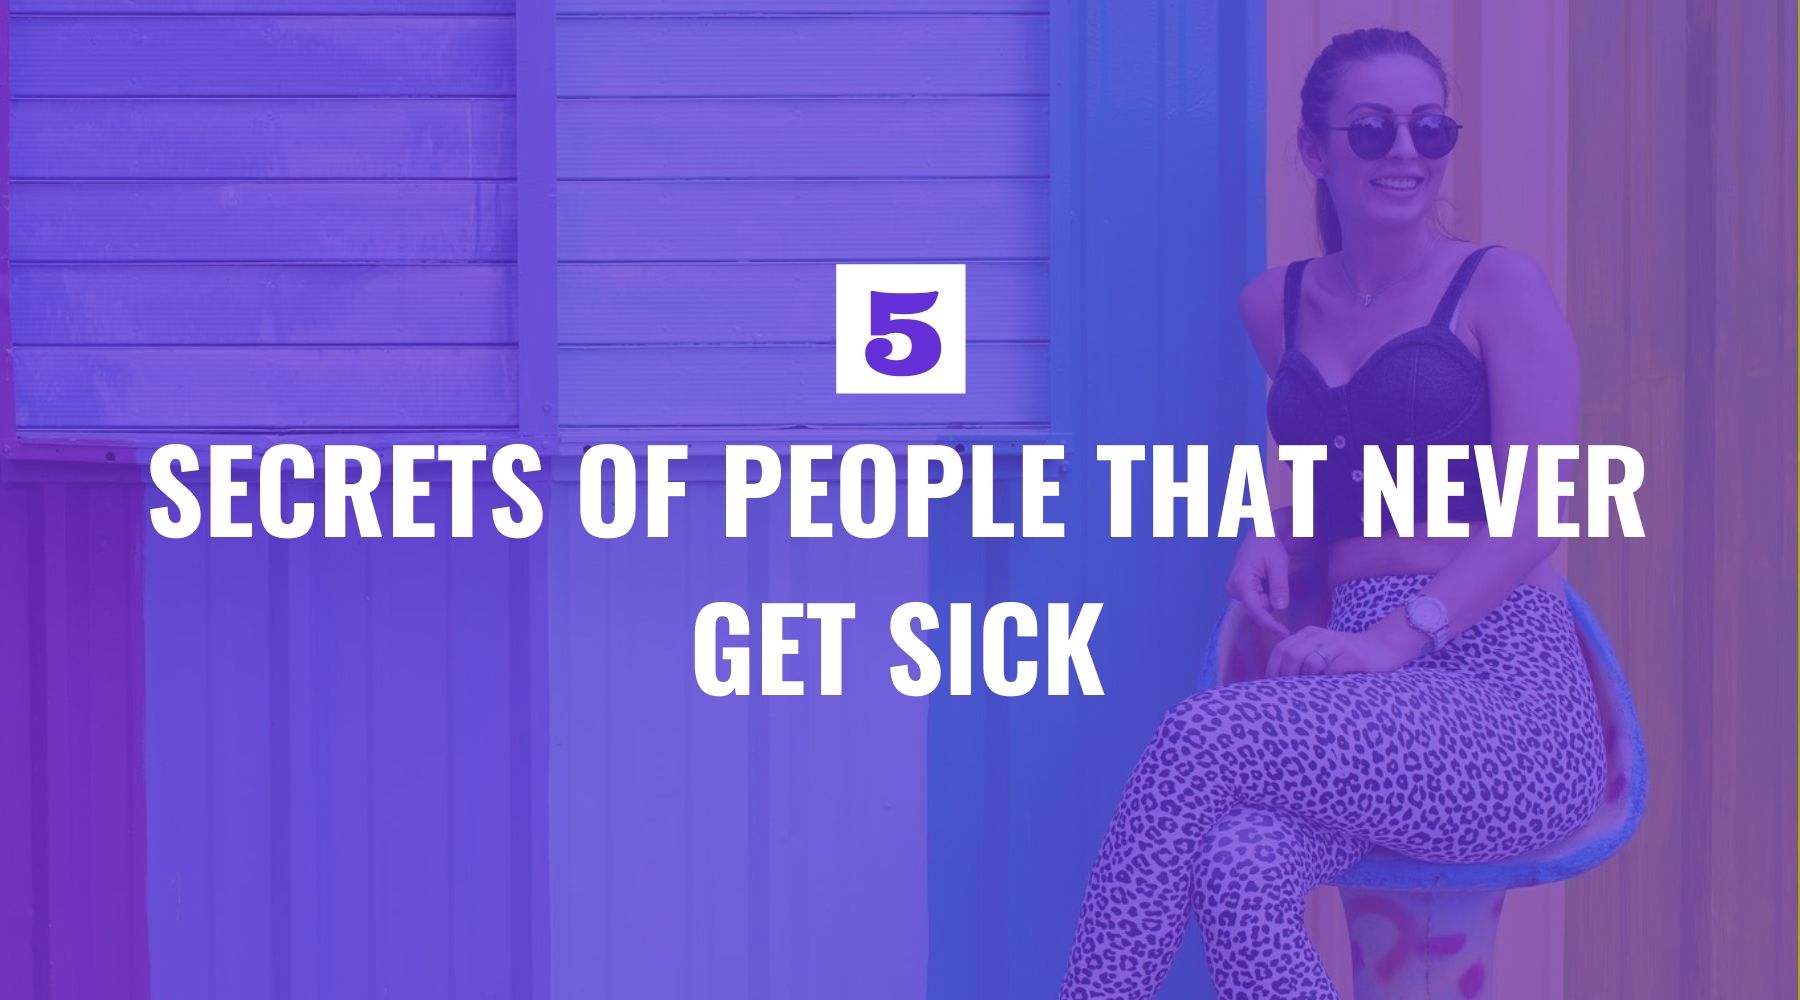 5 Secrets of People That Never Get Sick